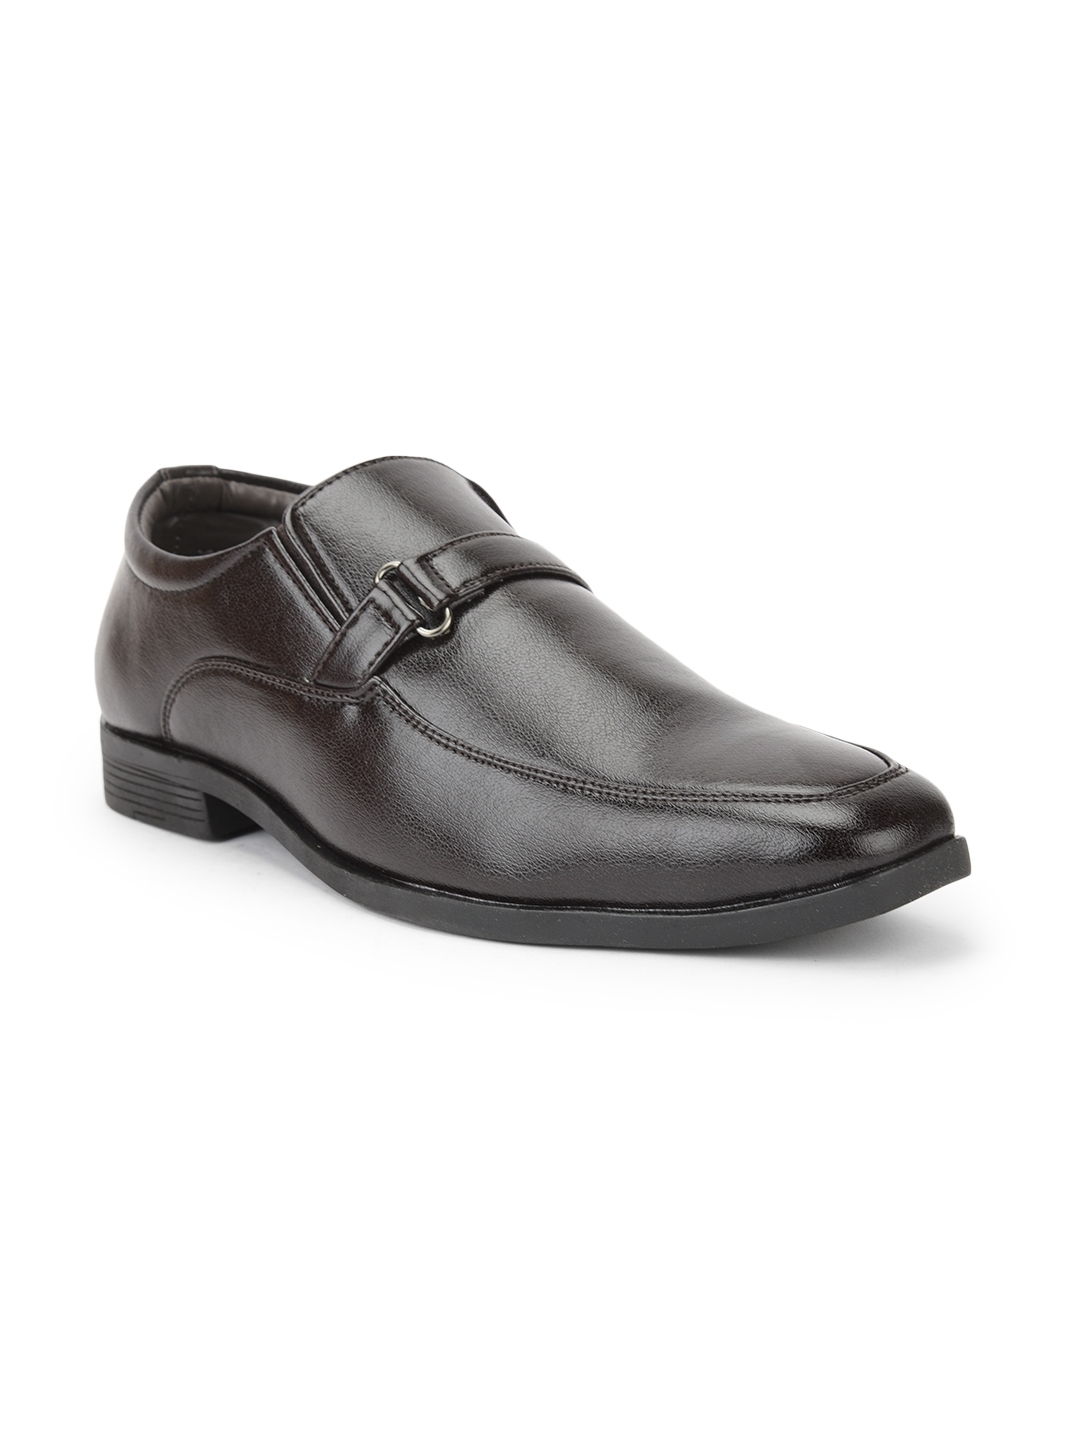 Liberty | Fortune by Liberty Brown Formal Slip-ons SRG-302E For :- Men